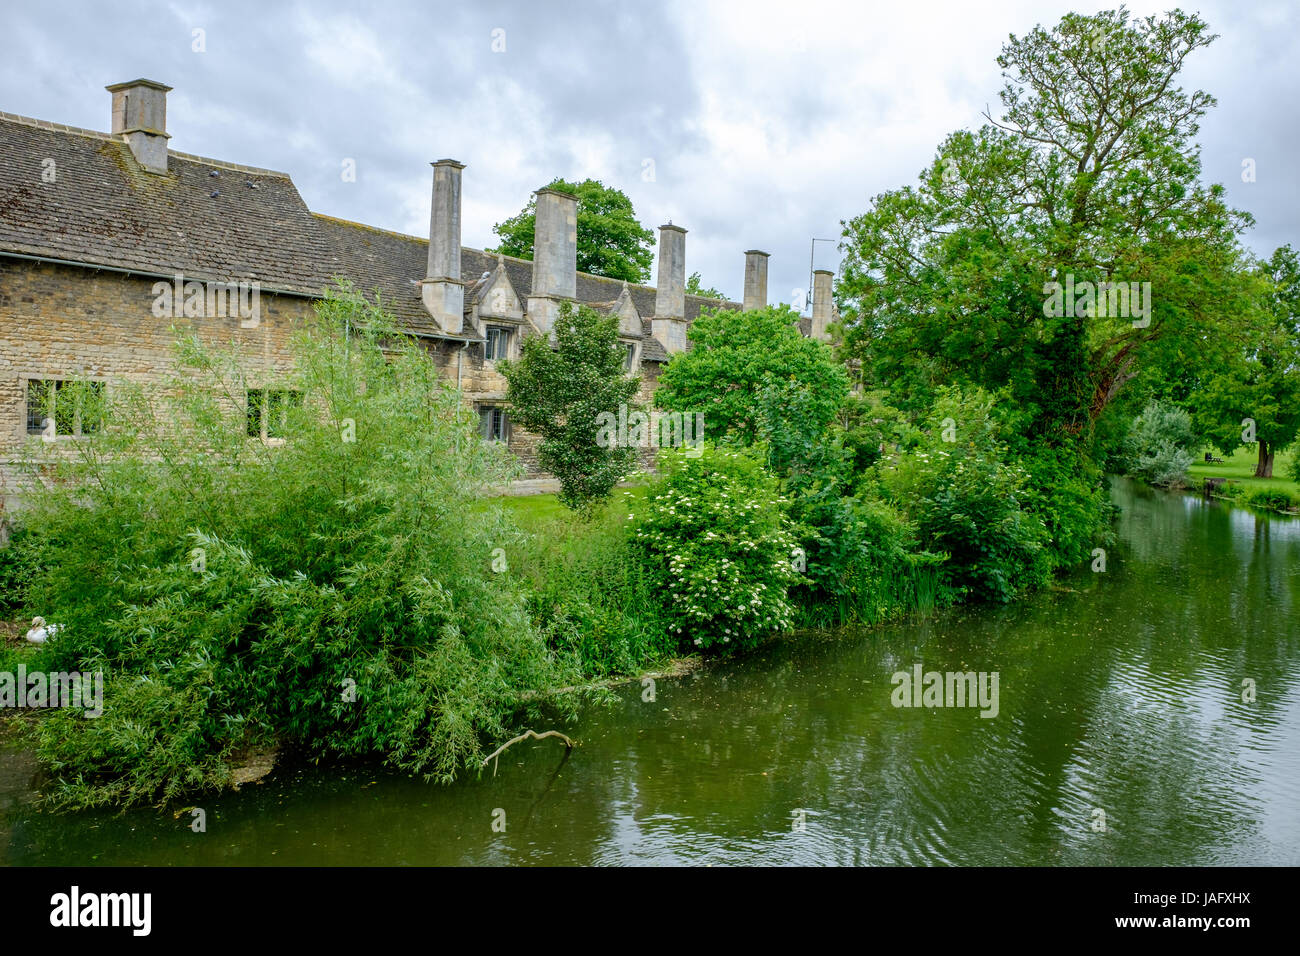 Stone riverside buildings on the bank of the river Welland at Stamford, a mainly stone town in Lincolnshire, England. Stock Photo